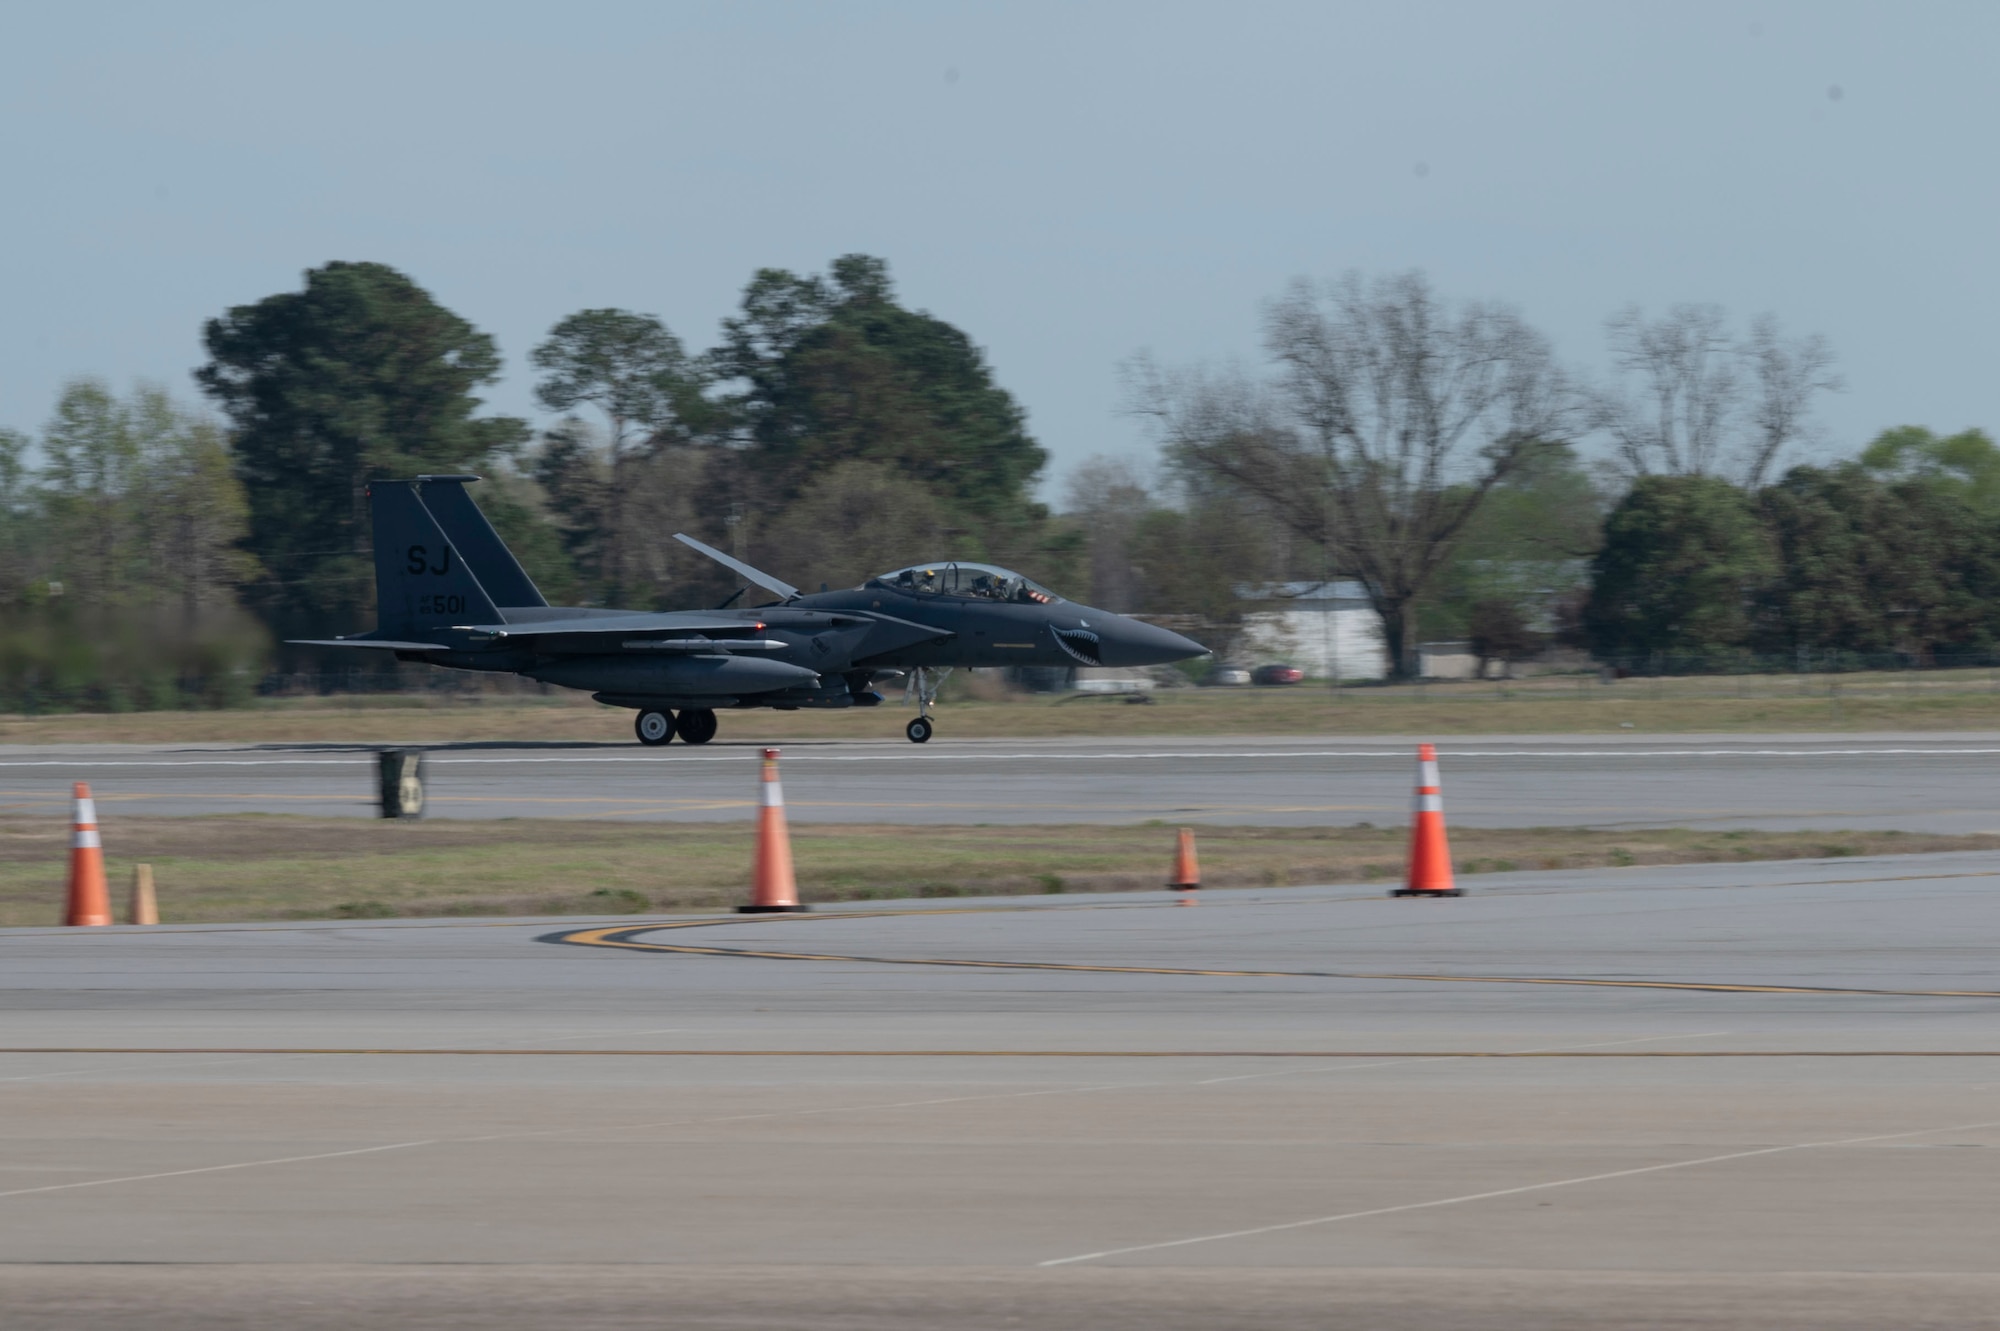 Airmen assigned to the 4th Fighter Wing arrive at Seymour Johnson Air Force Base, North Carolina, after returning from a deployment April 1, 2022. The Airmen and aircraft deployed to Europe in support of NATO operations where they ensured a protective posture of United States allies. (U.S. Air Force photo by Senior Airman Kevin Holloway)